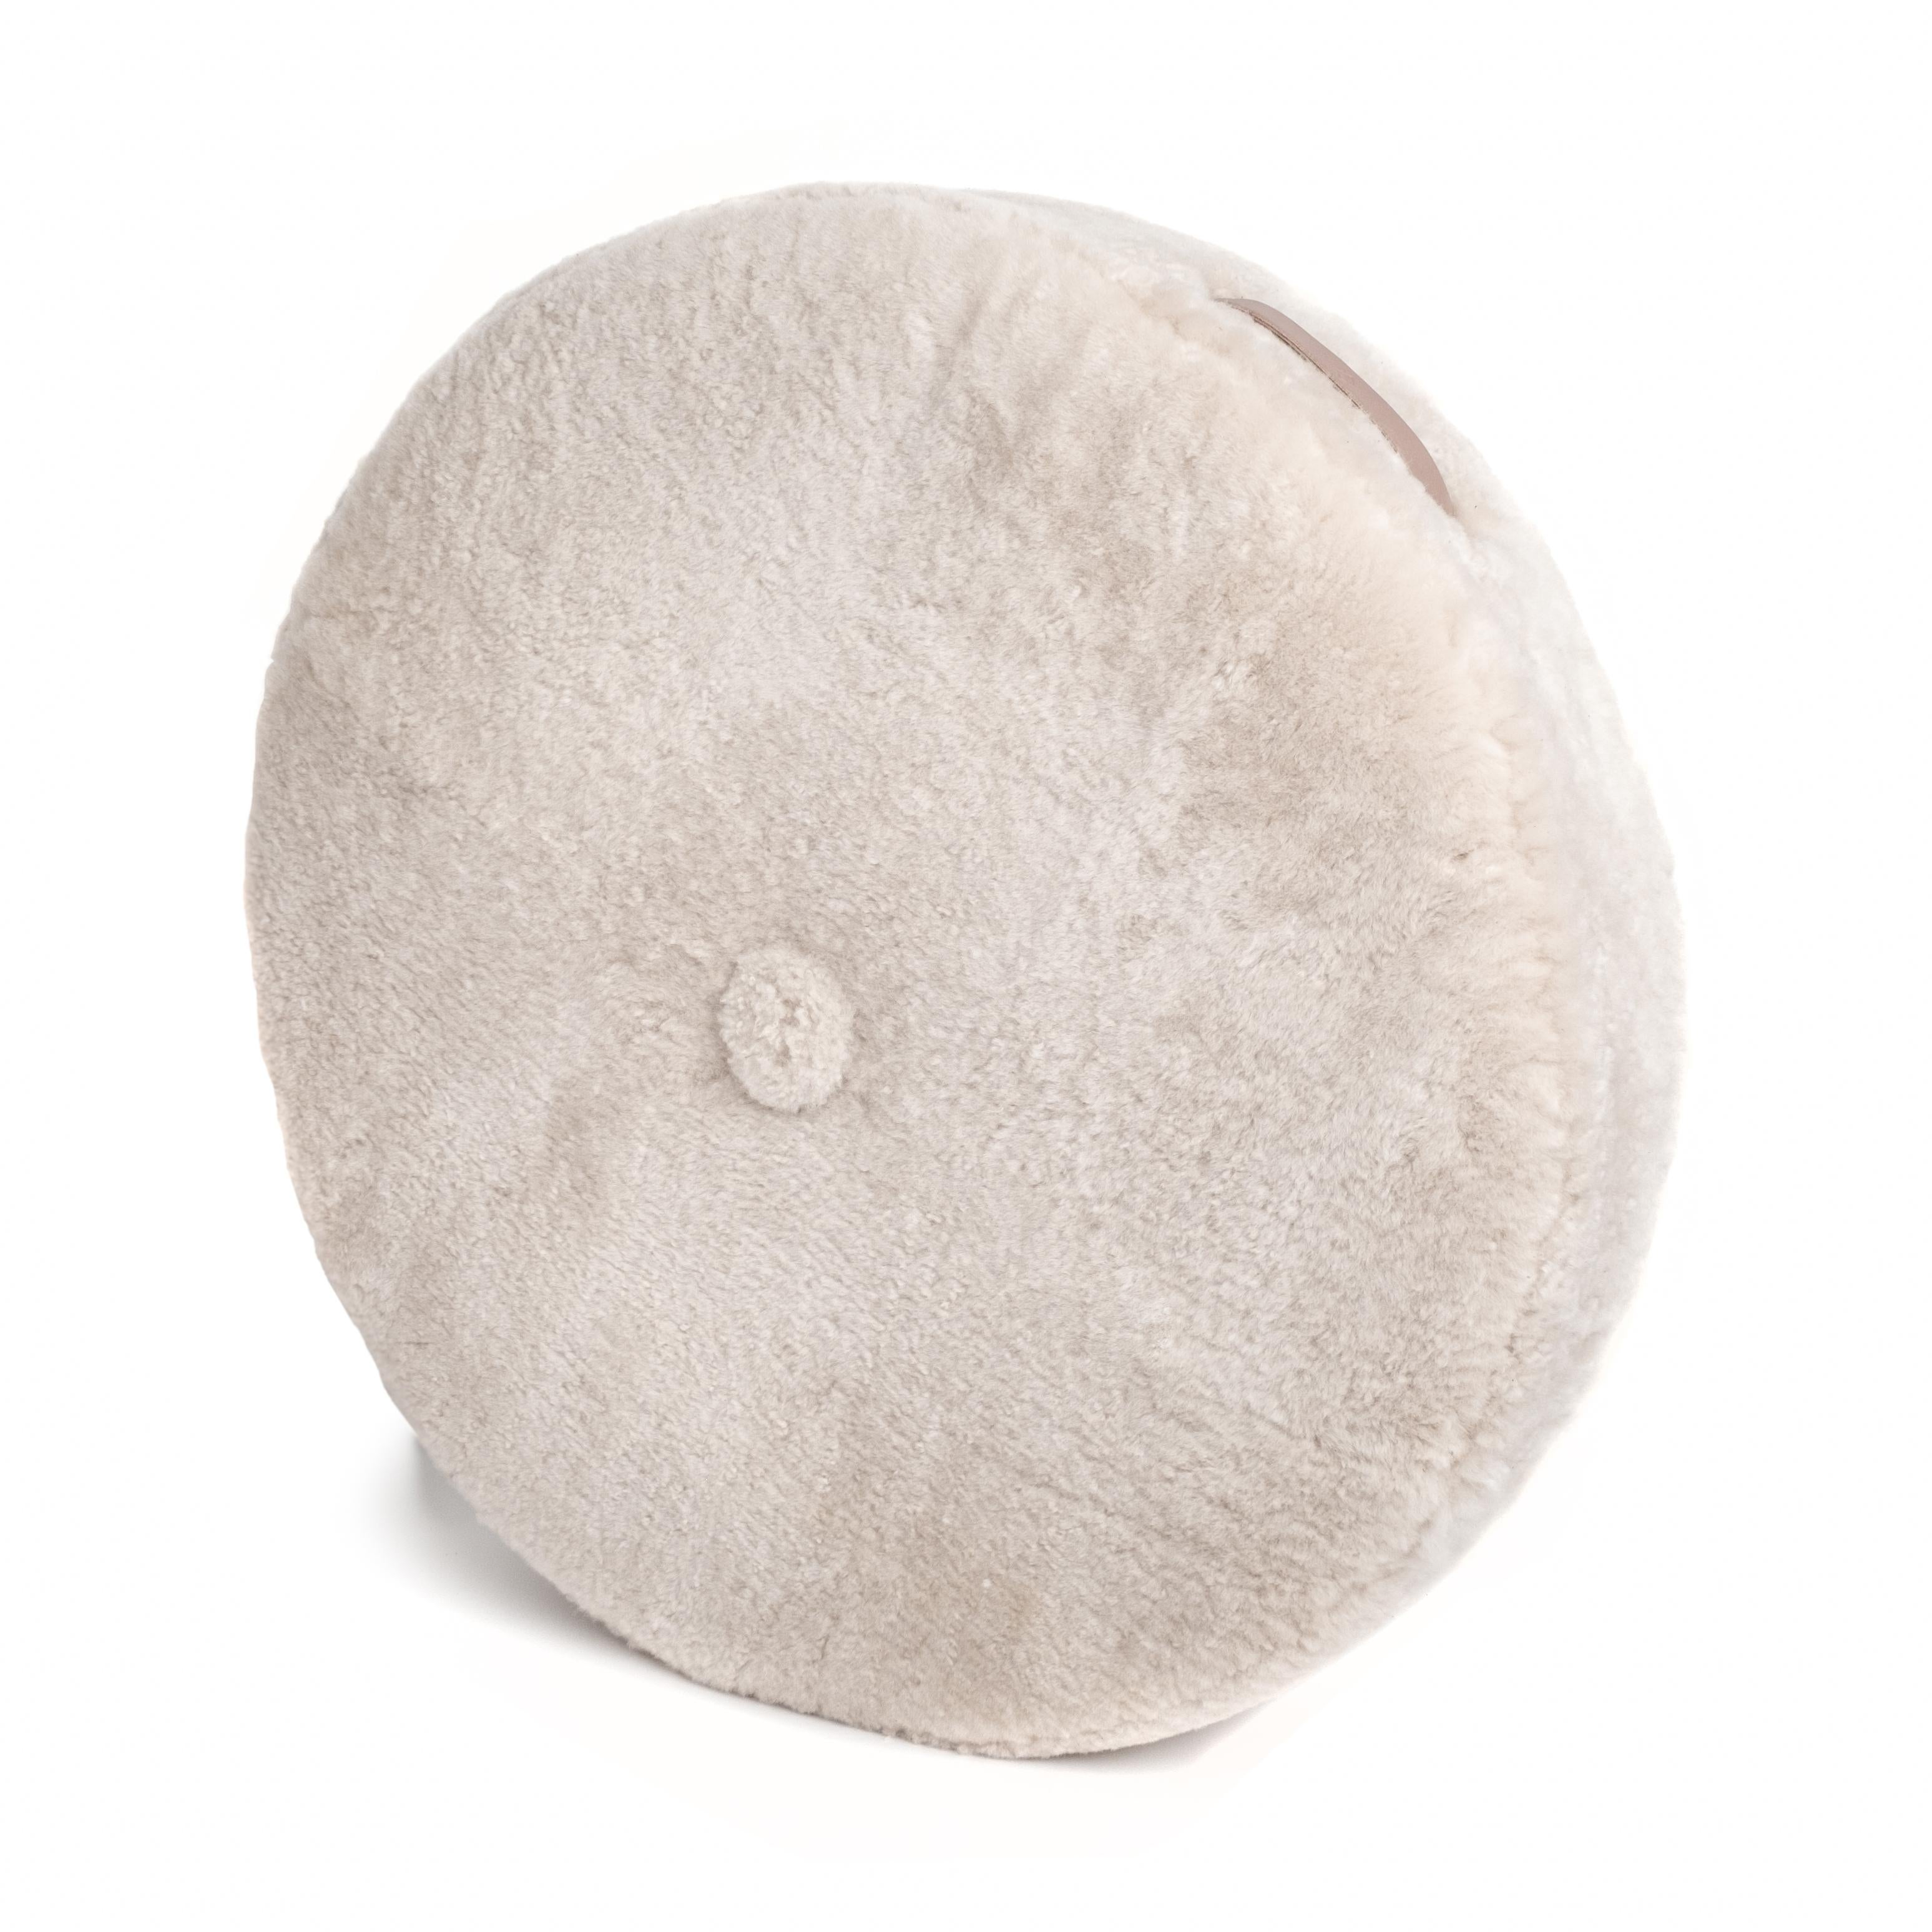 Designed to exude luxury and wake up your space with additional seating, accent decor and cozy chill zones, these low-profile circular shearling floor cushions can be easily moved or stashed away.  

Construction: Handcrafted to order in Long